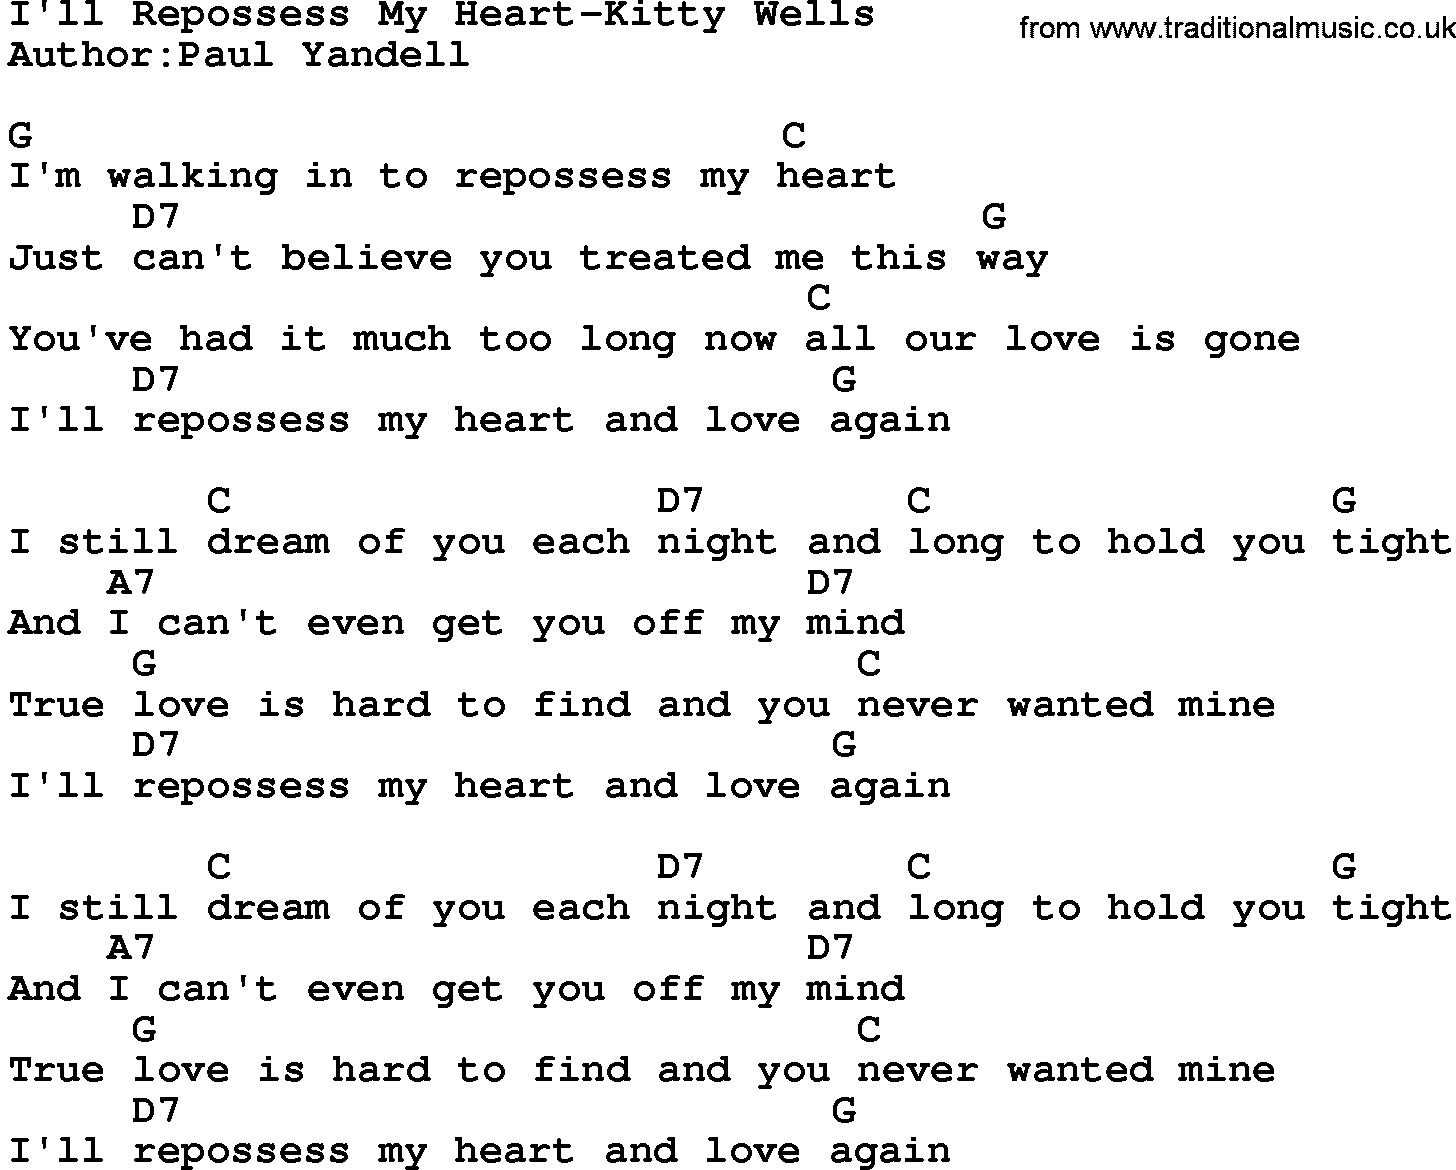 Country music song: I'll Repossess My Heart-Kitty Wells lyrics and chords